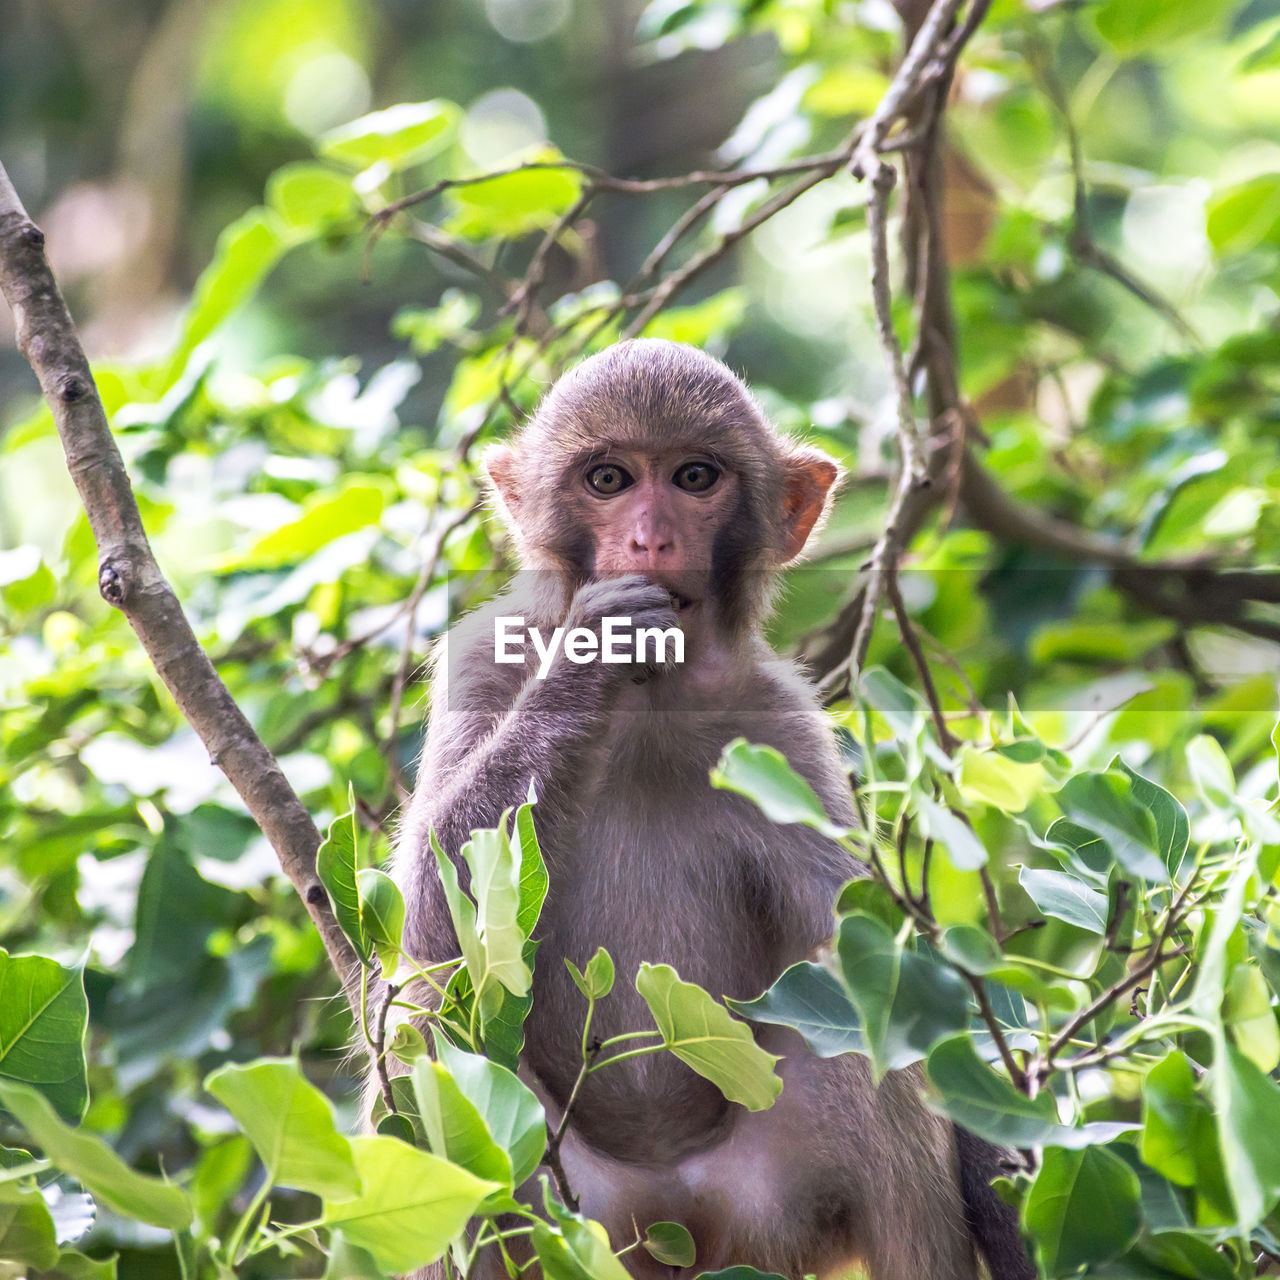 PORTRAIT OF MONKEY ON TREE BRANCH AGAINST BLURRED TREES